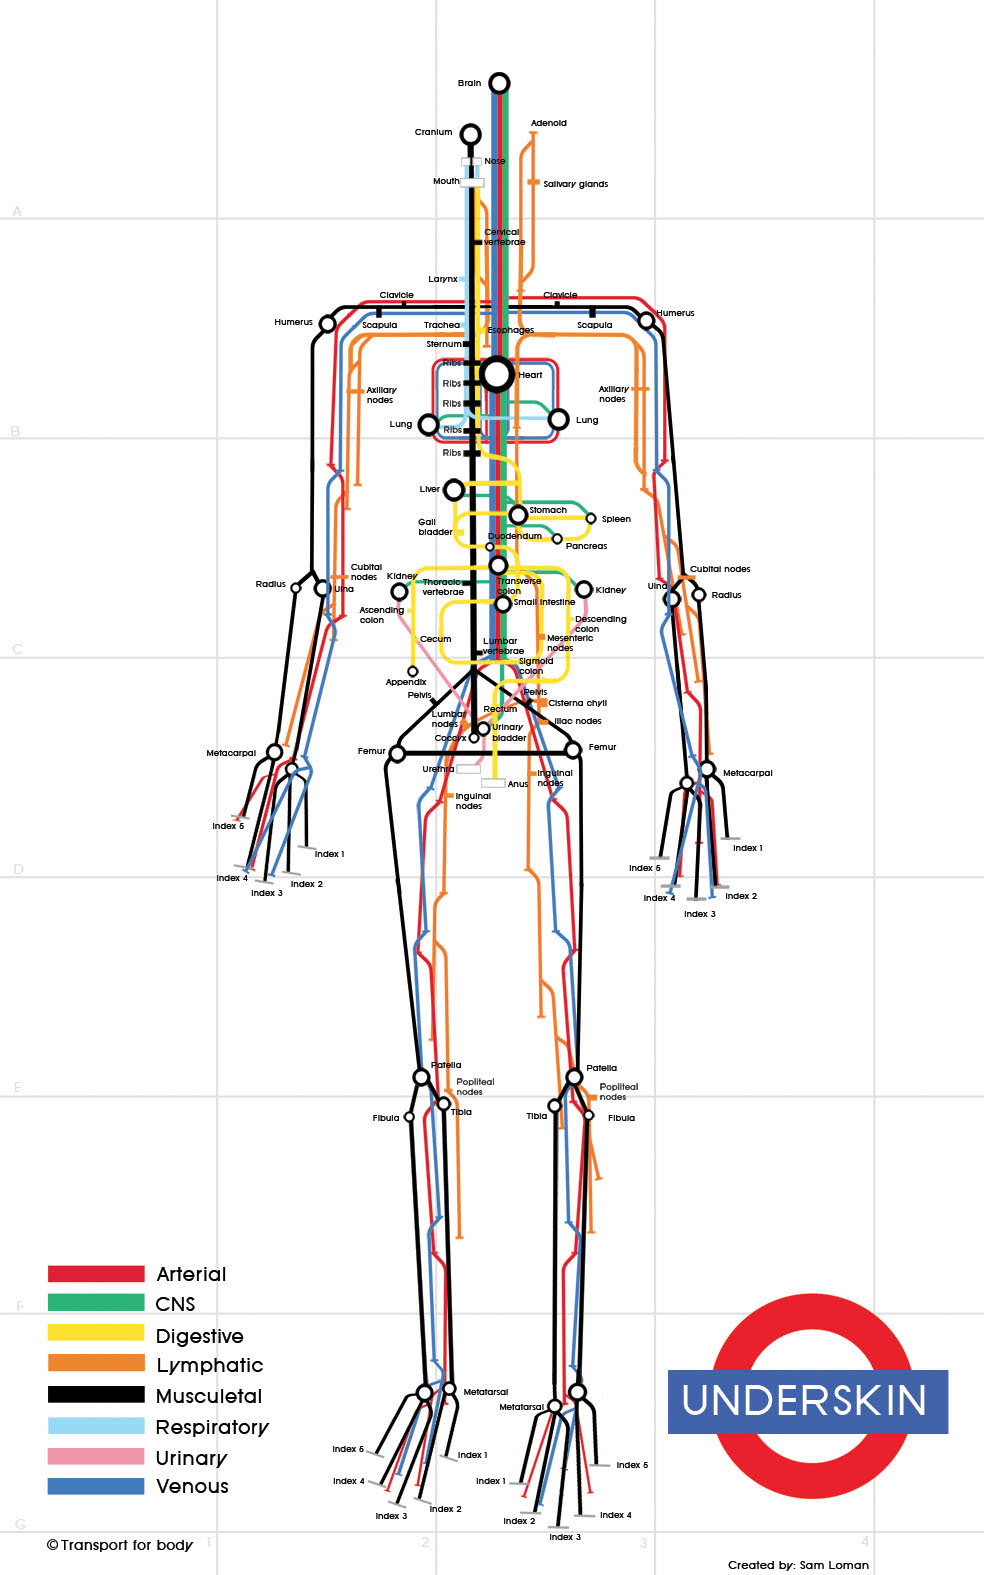 Simplified mapping of our under-skin body,